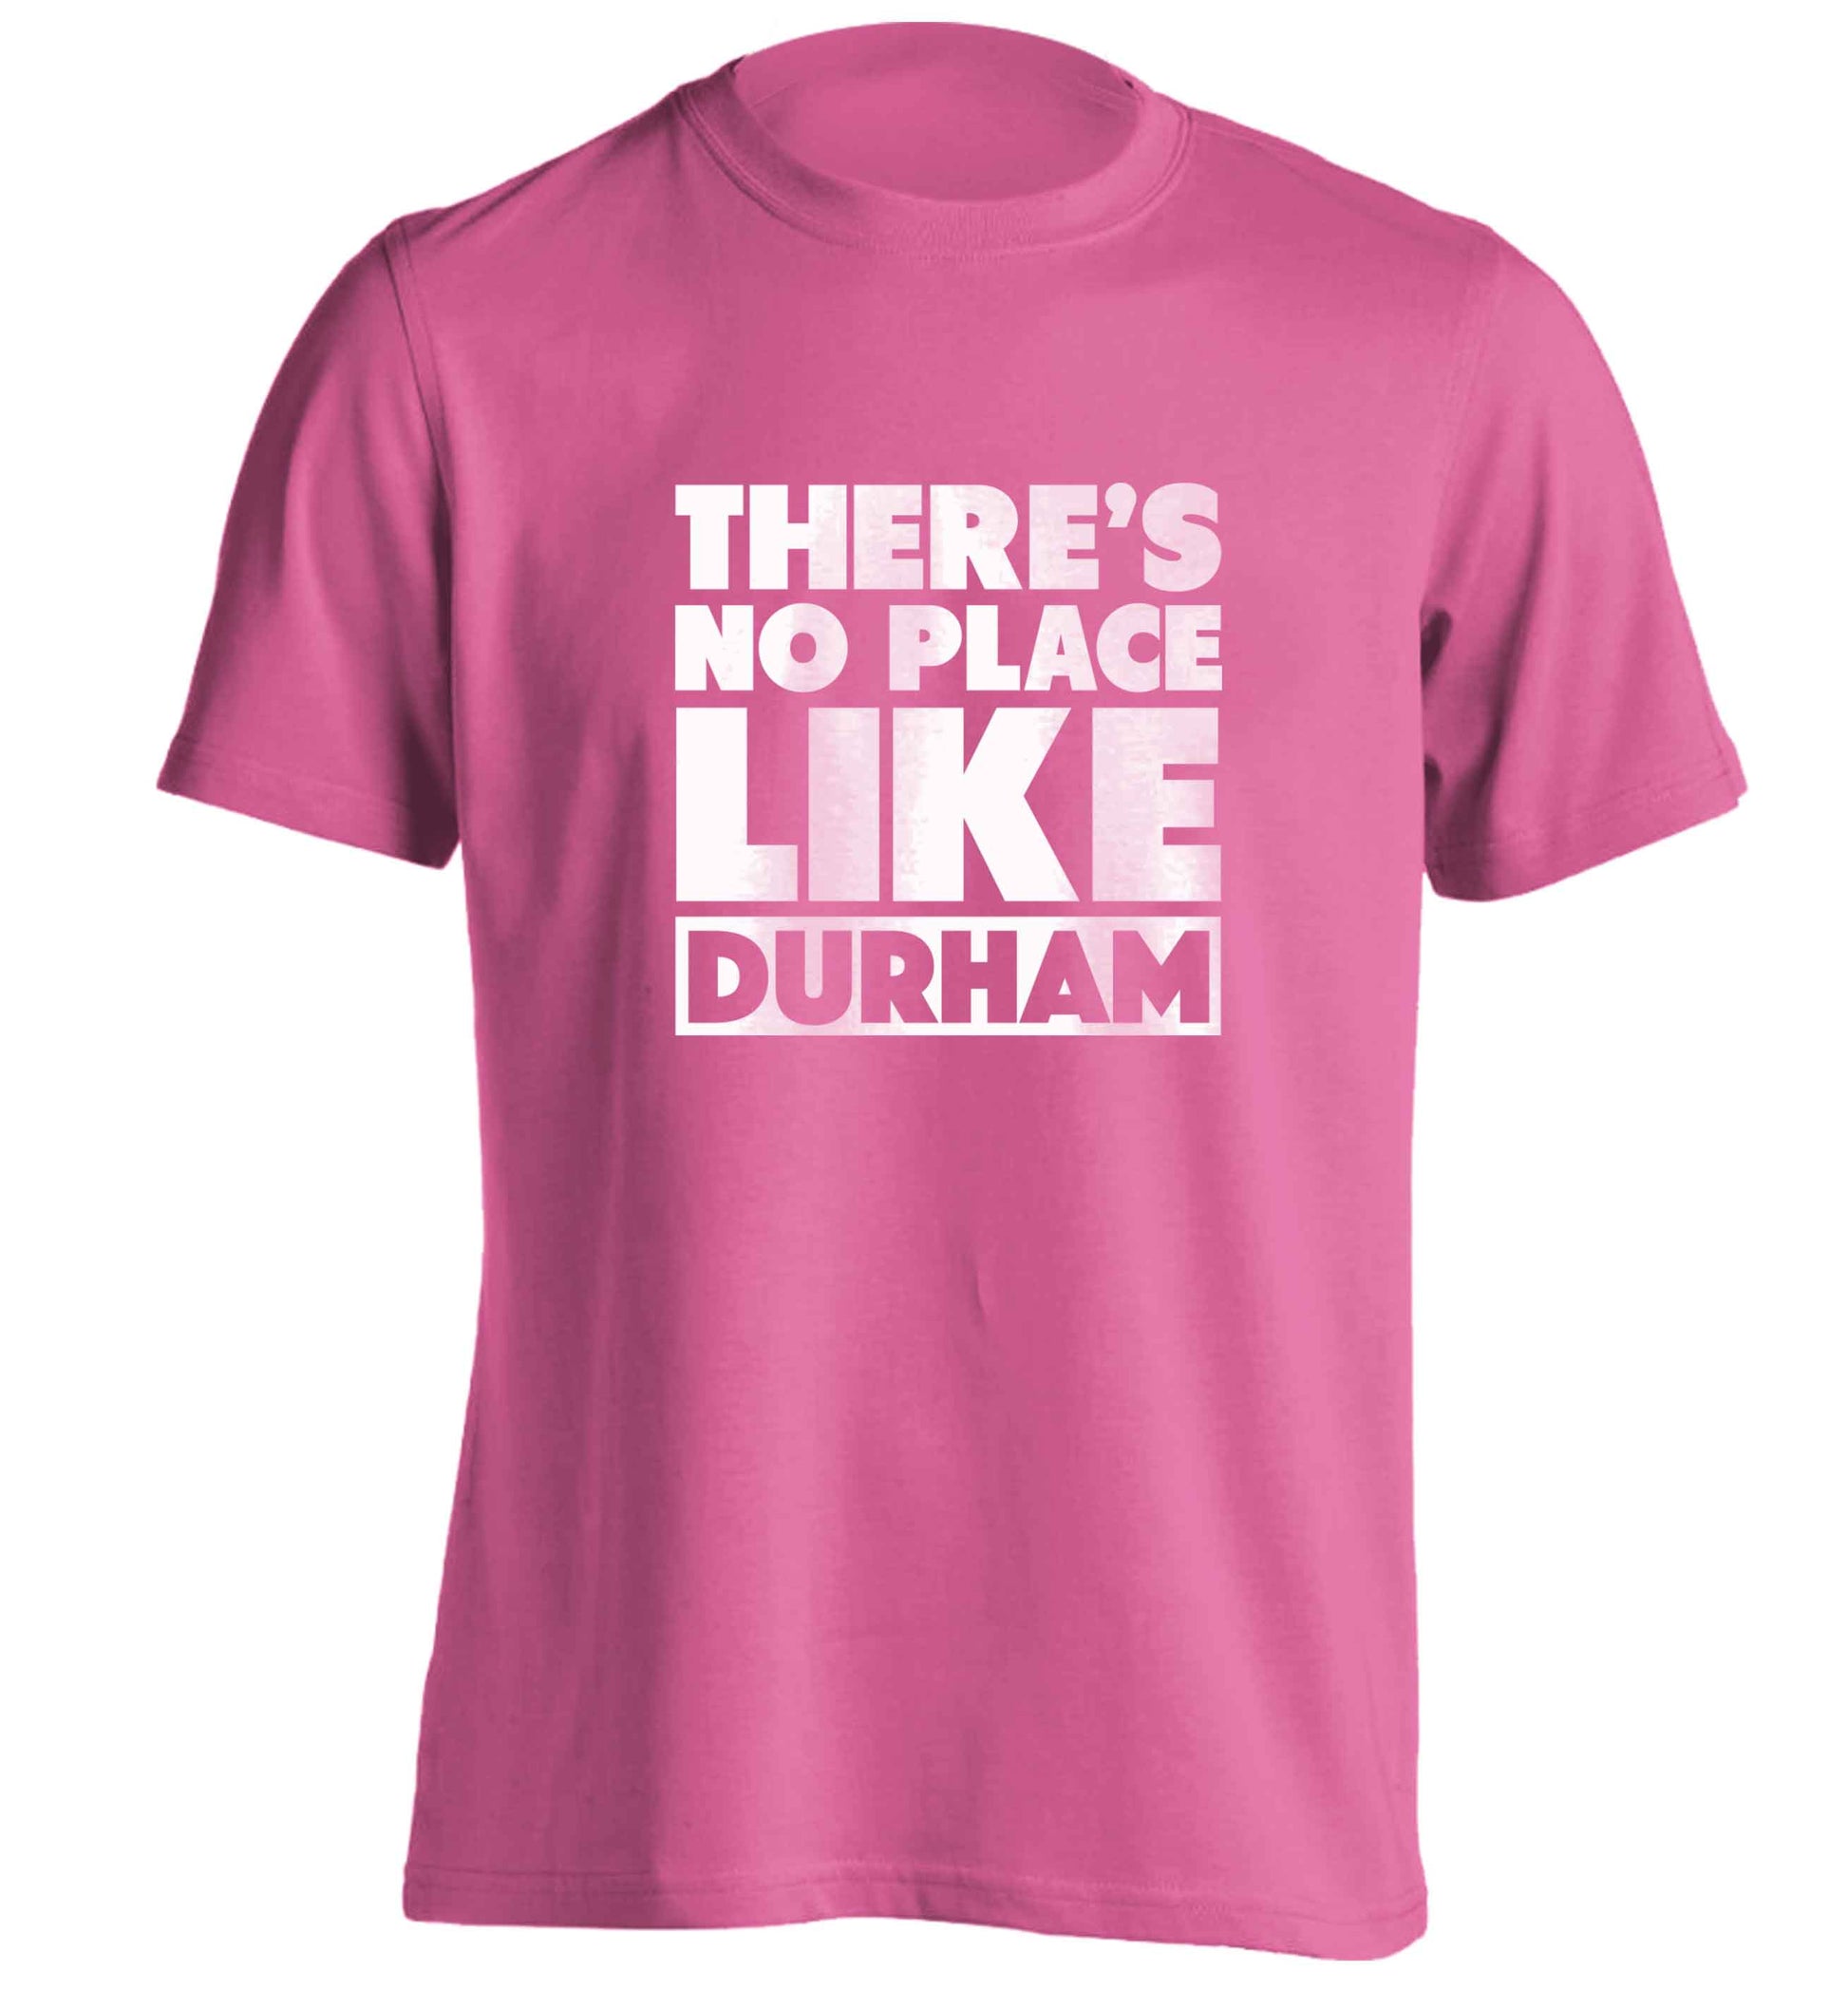 There's no place like Durham adults unisex pink Tshirt 2XL